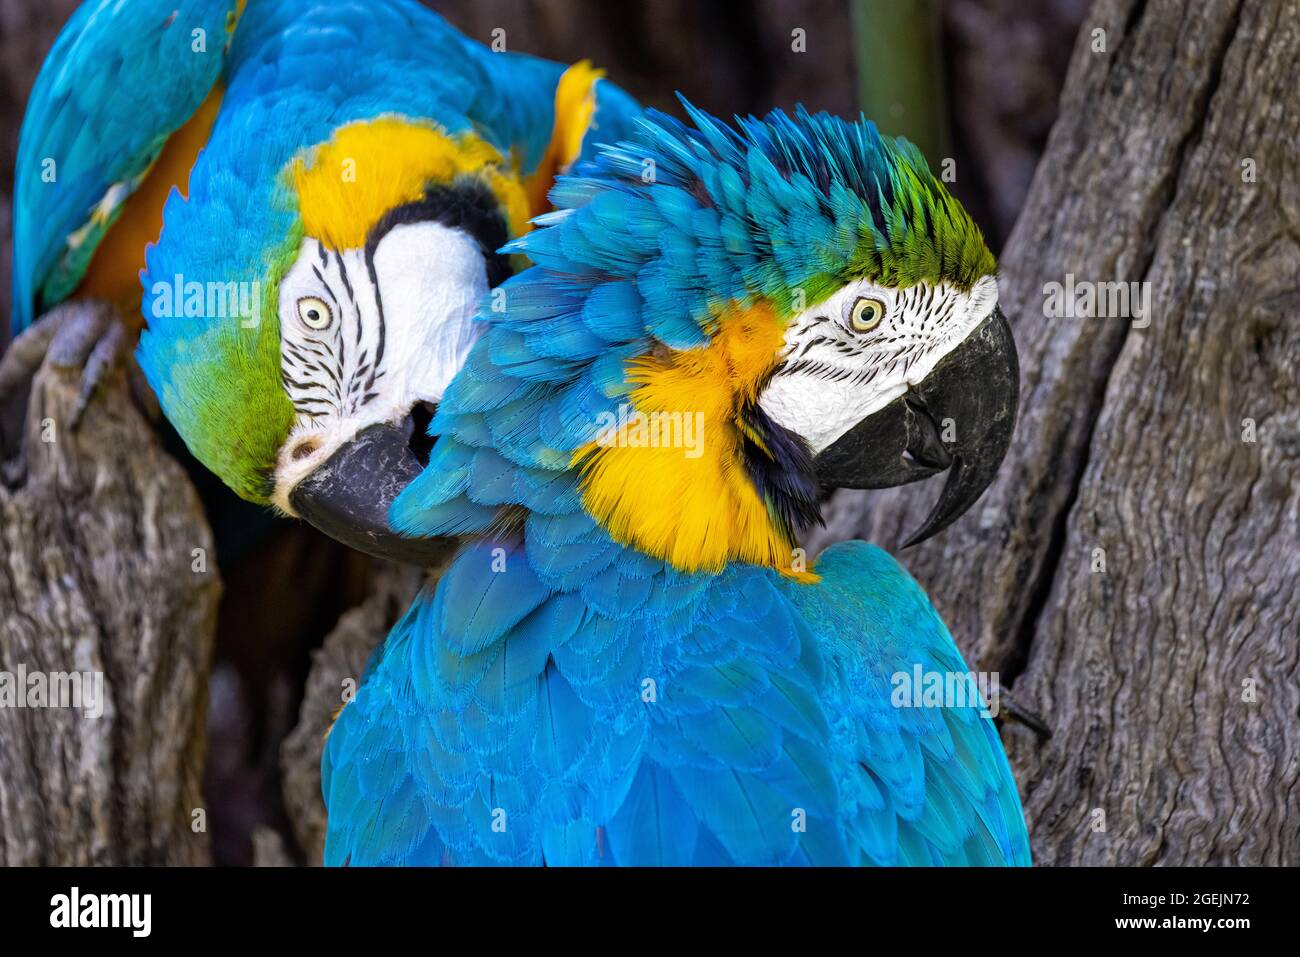 Close up portrait of two colorful yellow and blue macaw parrots grooming each other Stock Photo